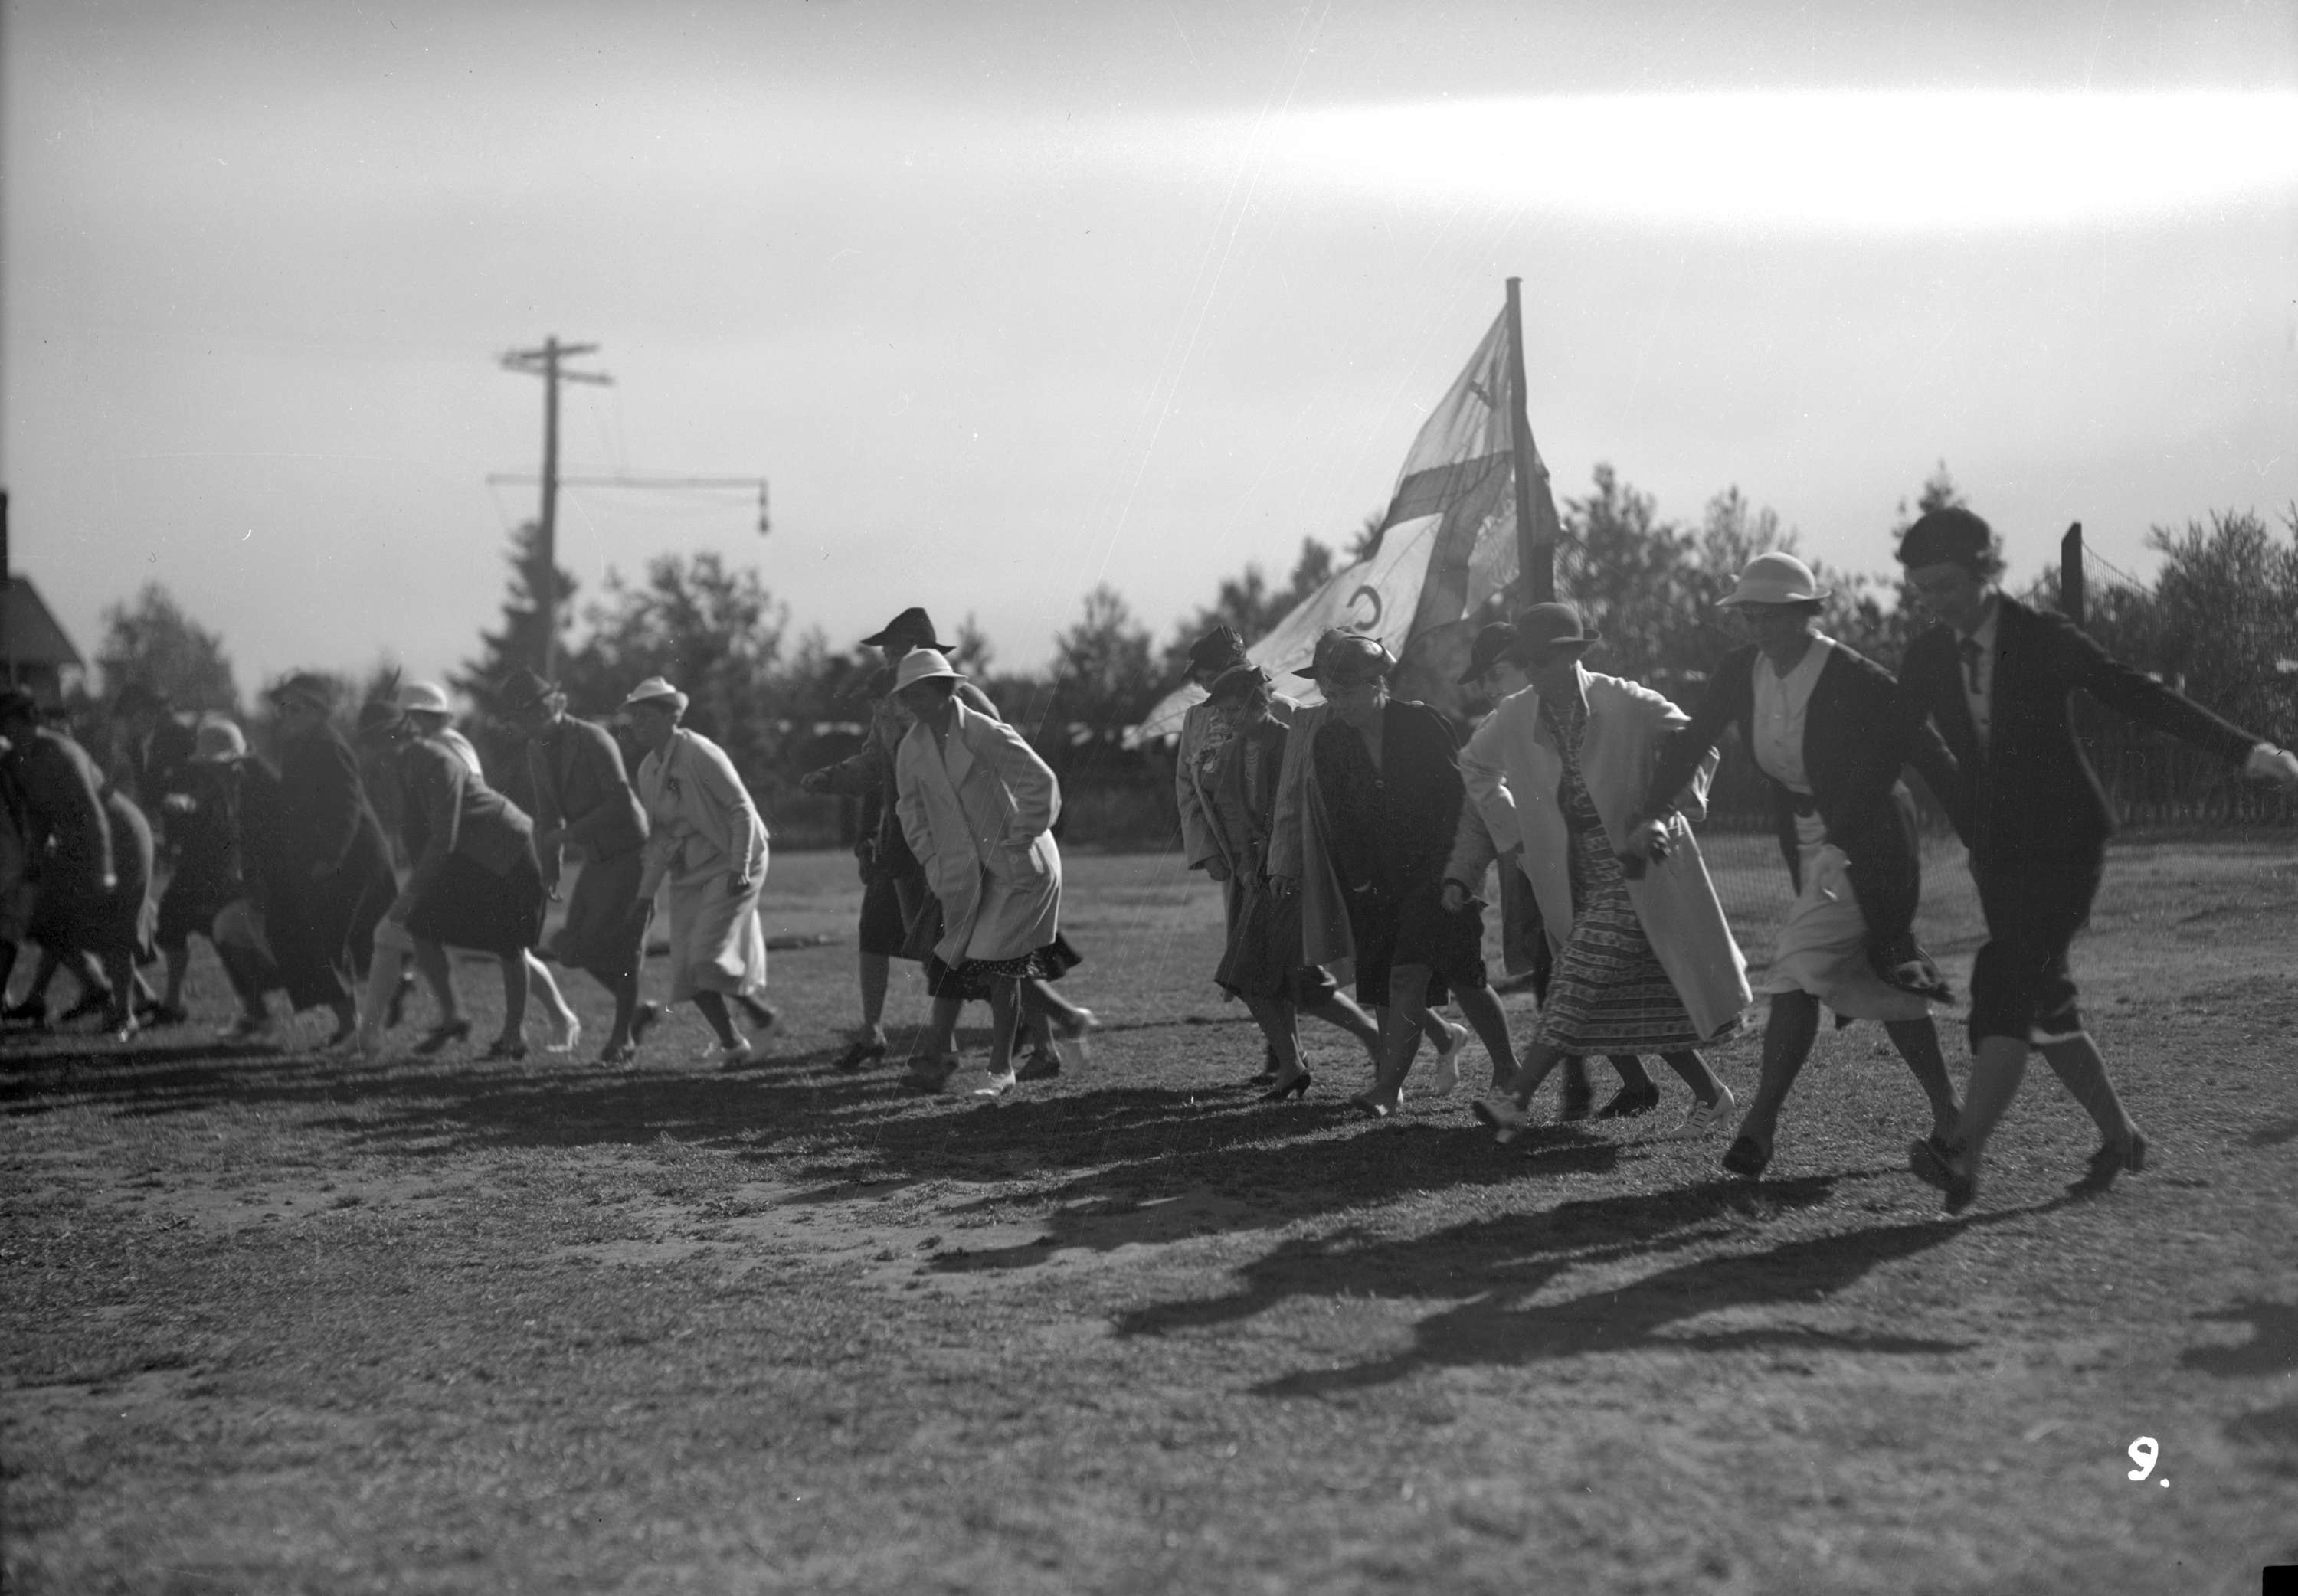 st-george-s-school-sports-day-1938-city-of-vancouver-archives